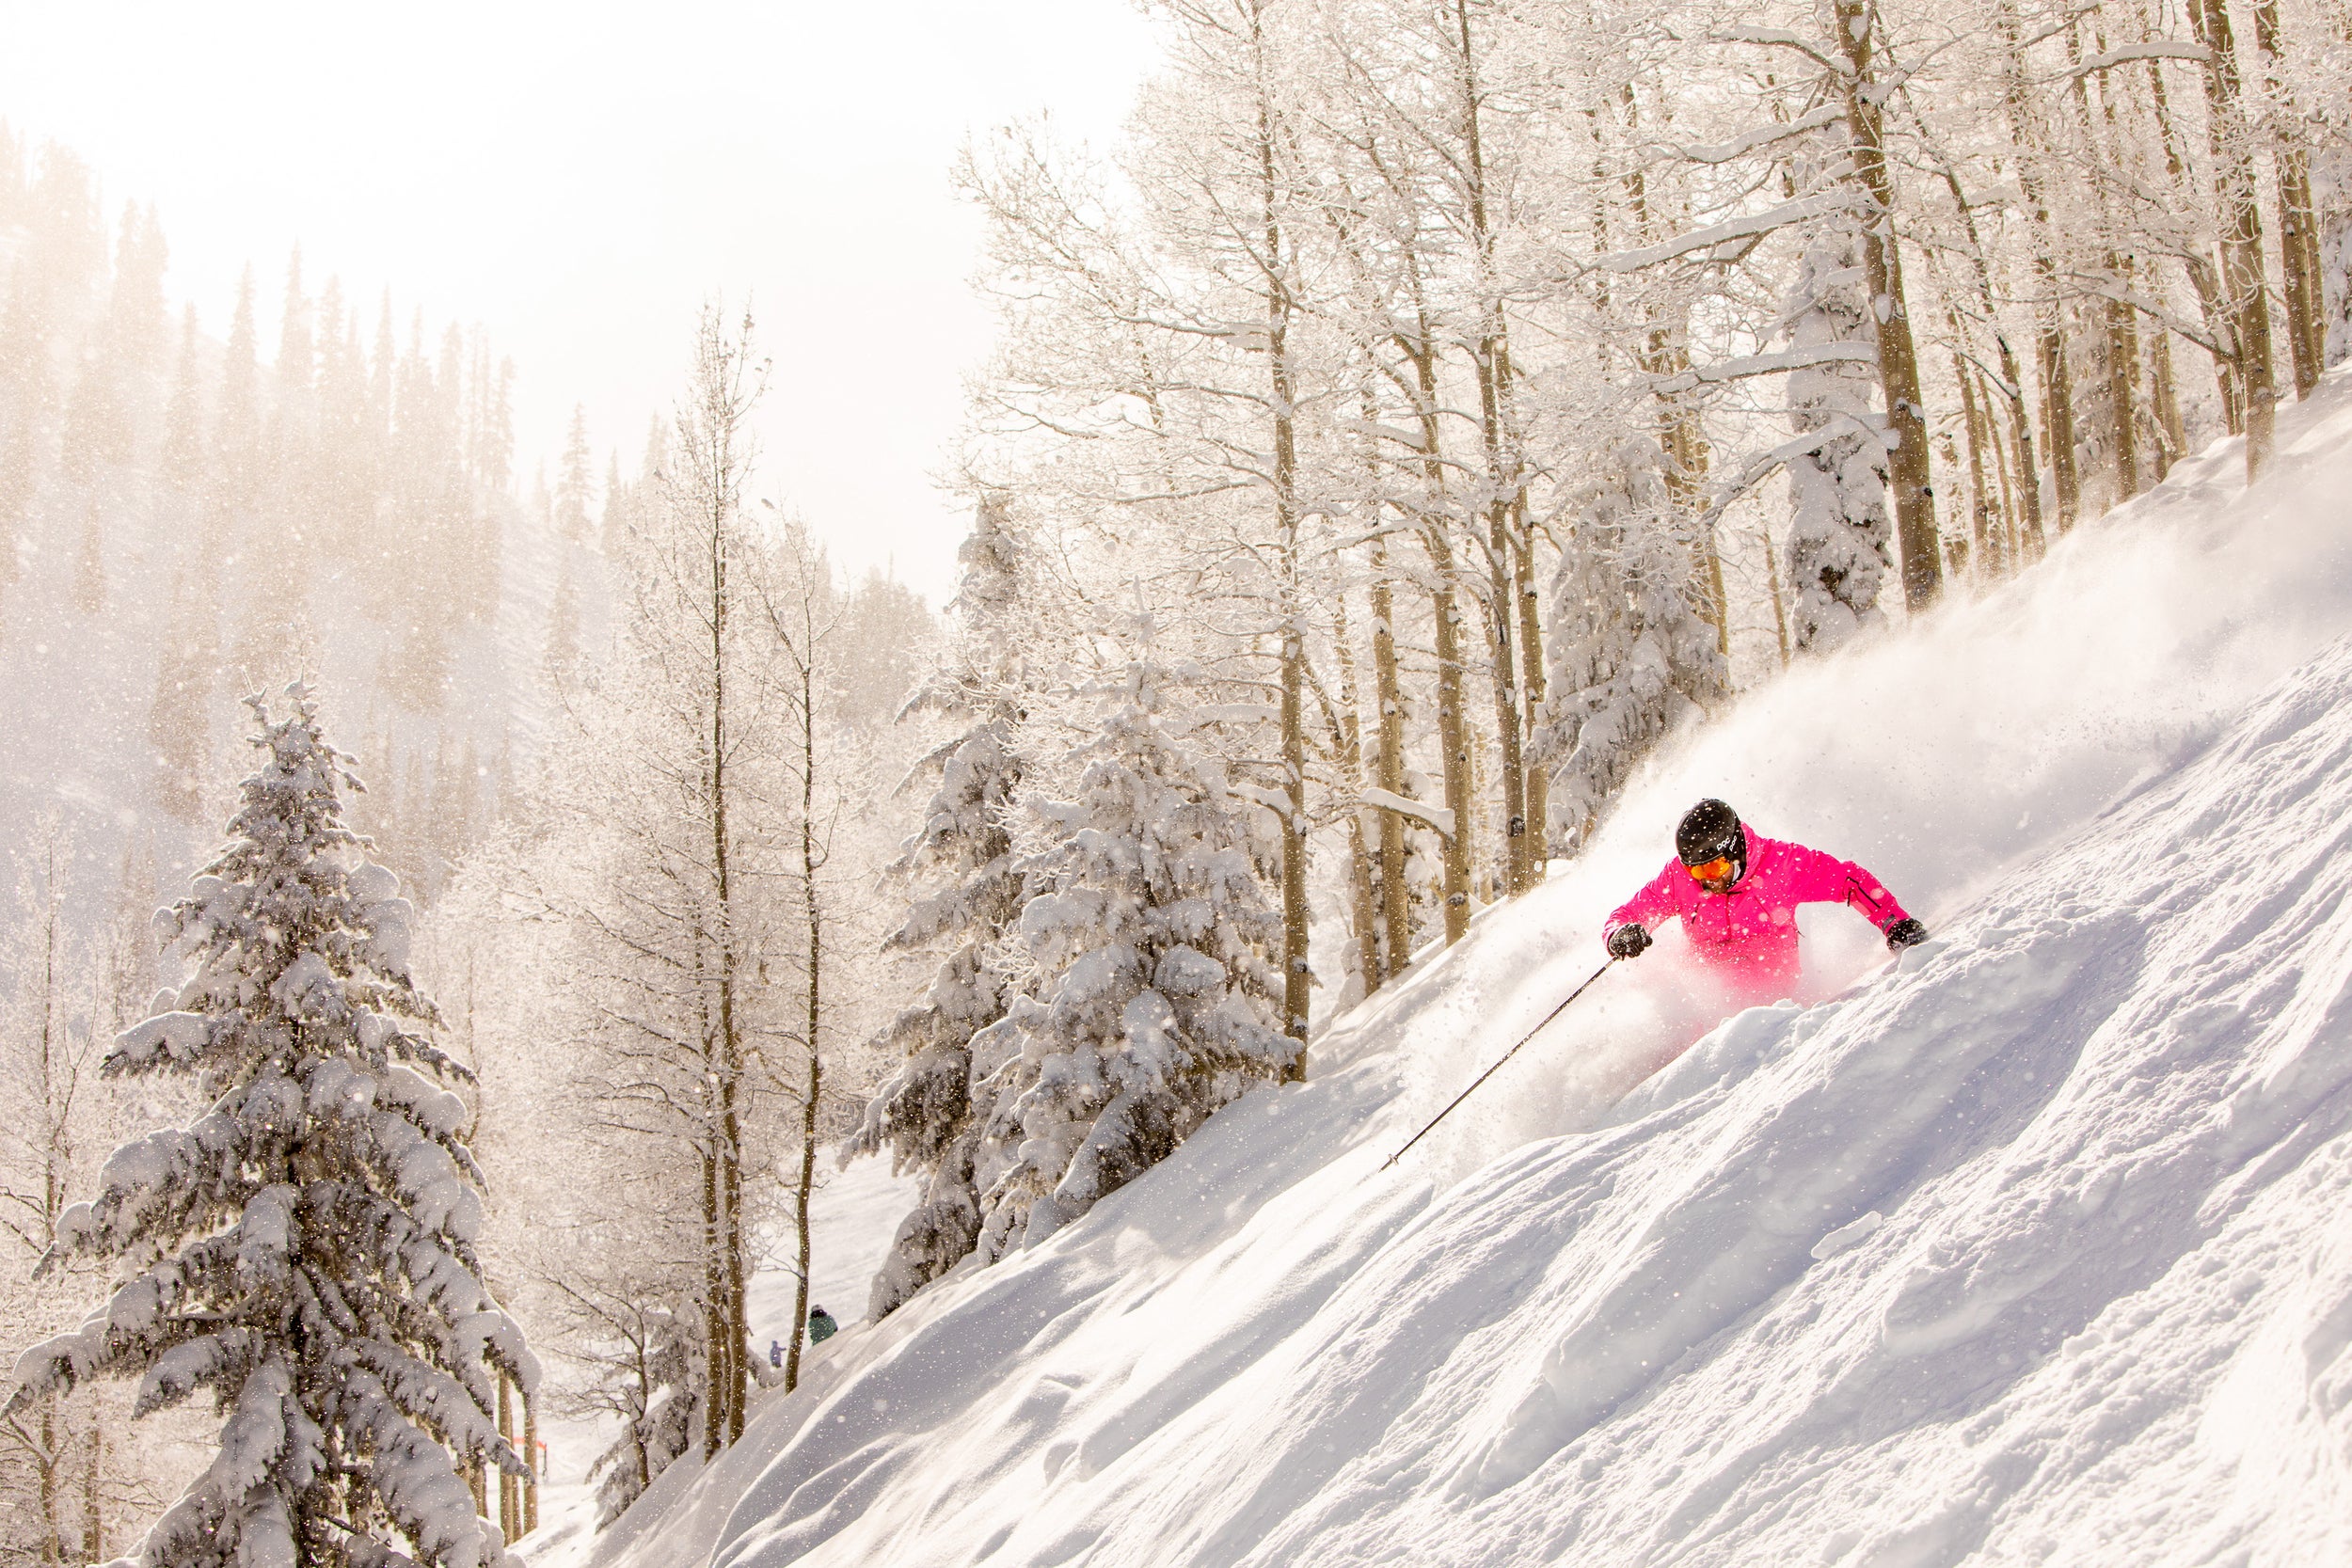 10 Best Ski Resorts In The US [2022 Guide]